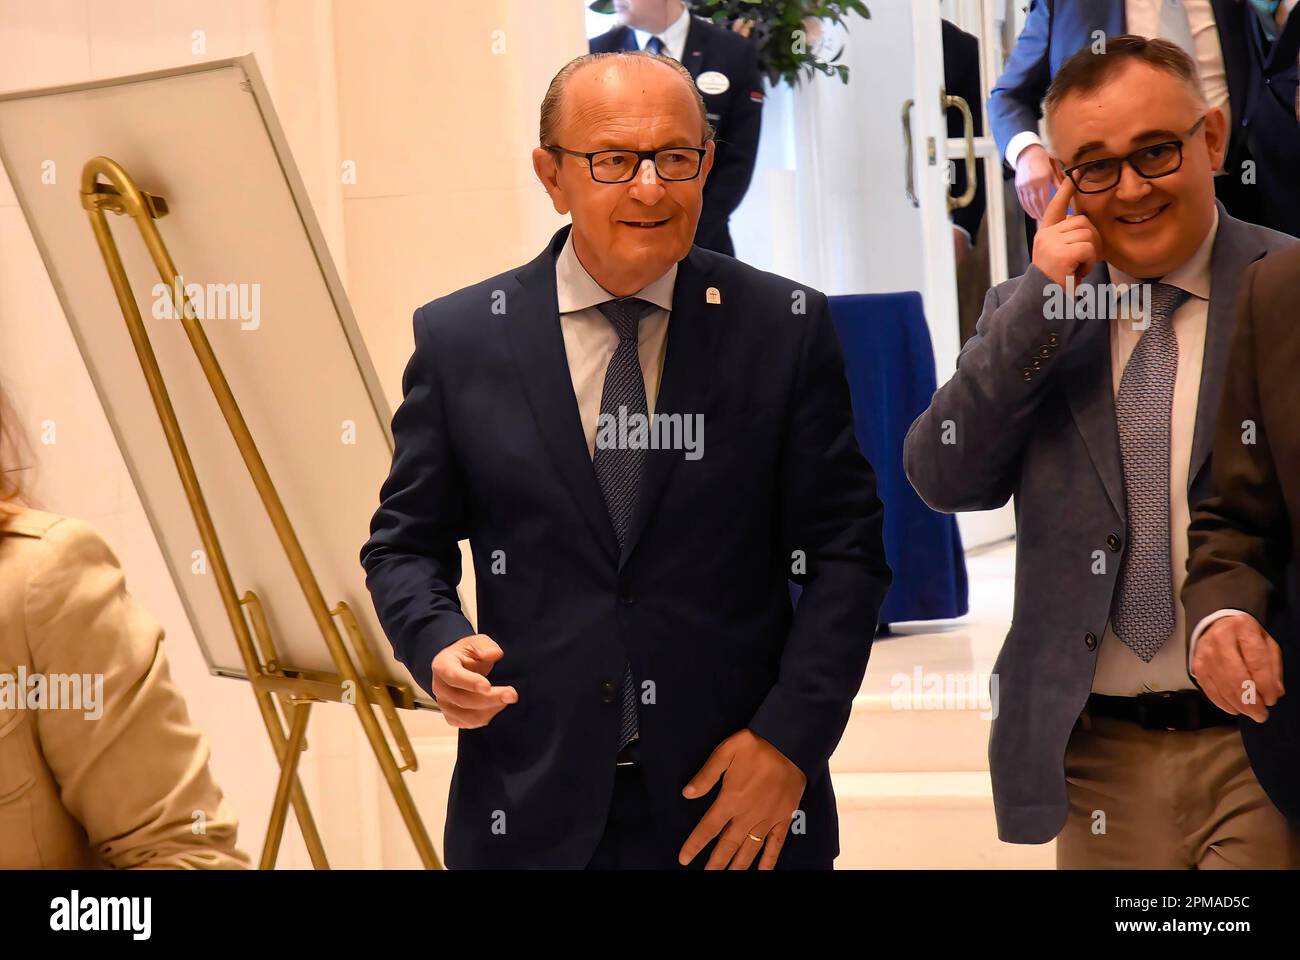 Madrid, Spain. 12th Apr, 2023. The Minister of tourism of the Government of Cantabria, Francisco Javier López Marcano, seen arriving at the Ritz Hotel during the presentation. The president of Cantabria, together with colleagues from the Cantabrian Regionalist Party, presented his candidacy for re-election in Madrid. Credit: SOPA Images Limited/Alamy Live News Stock Photo